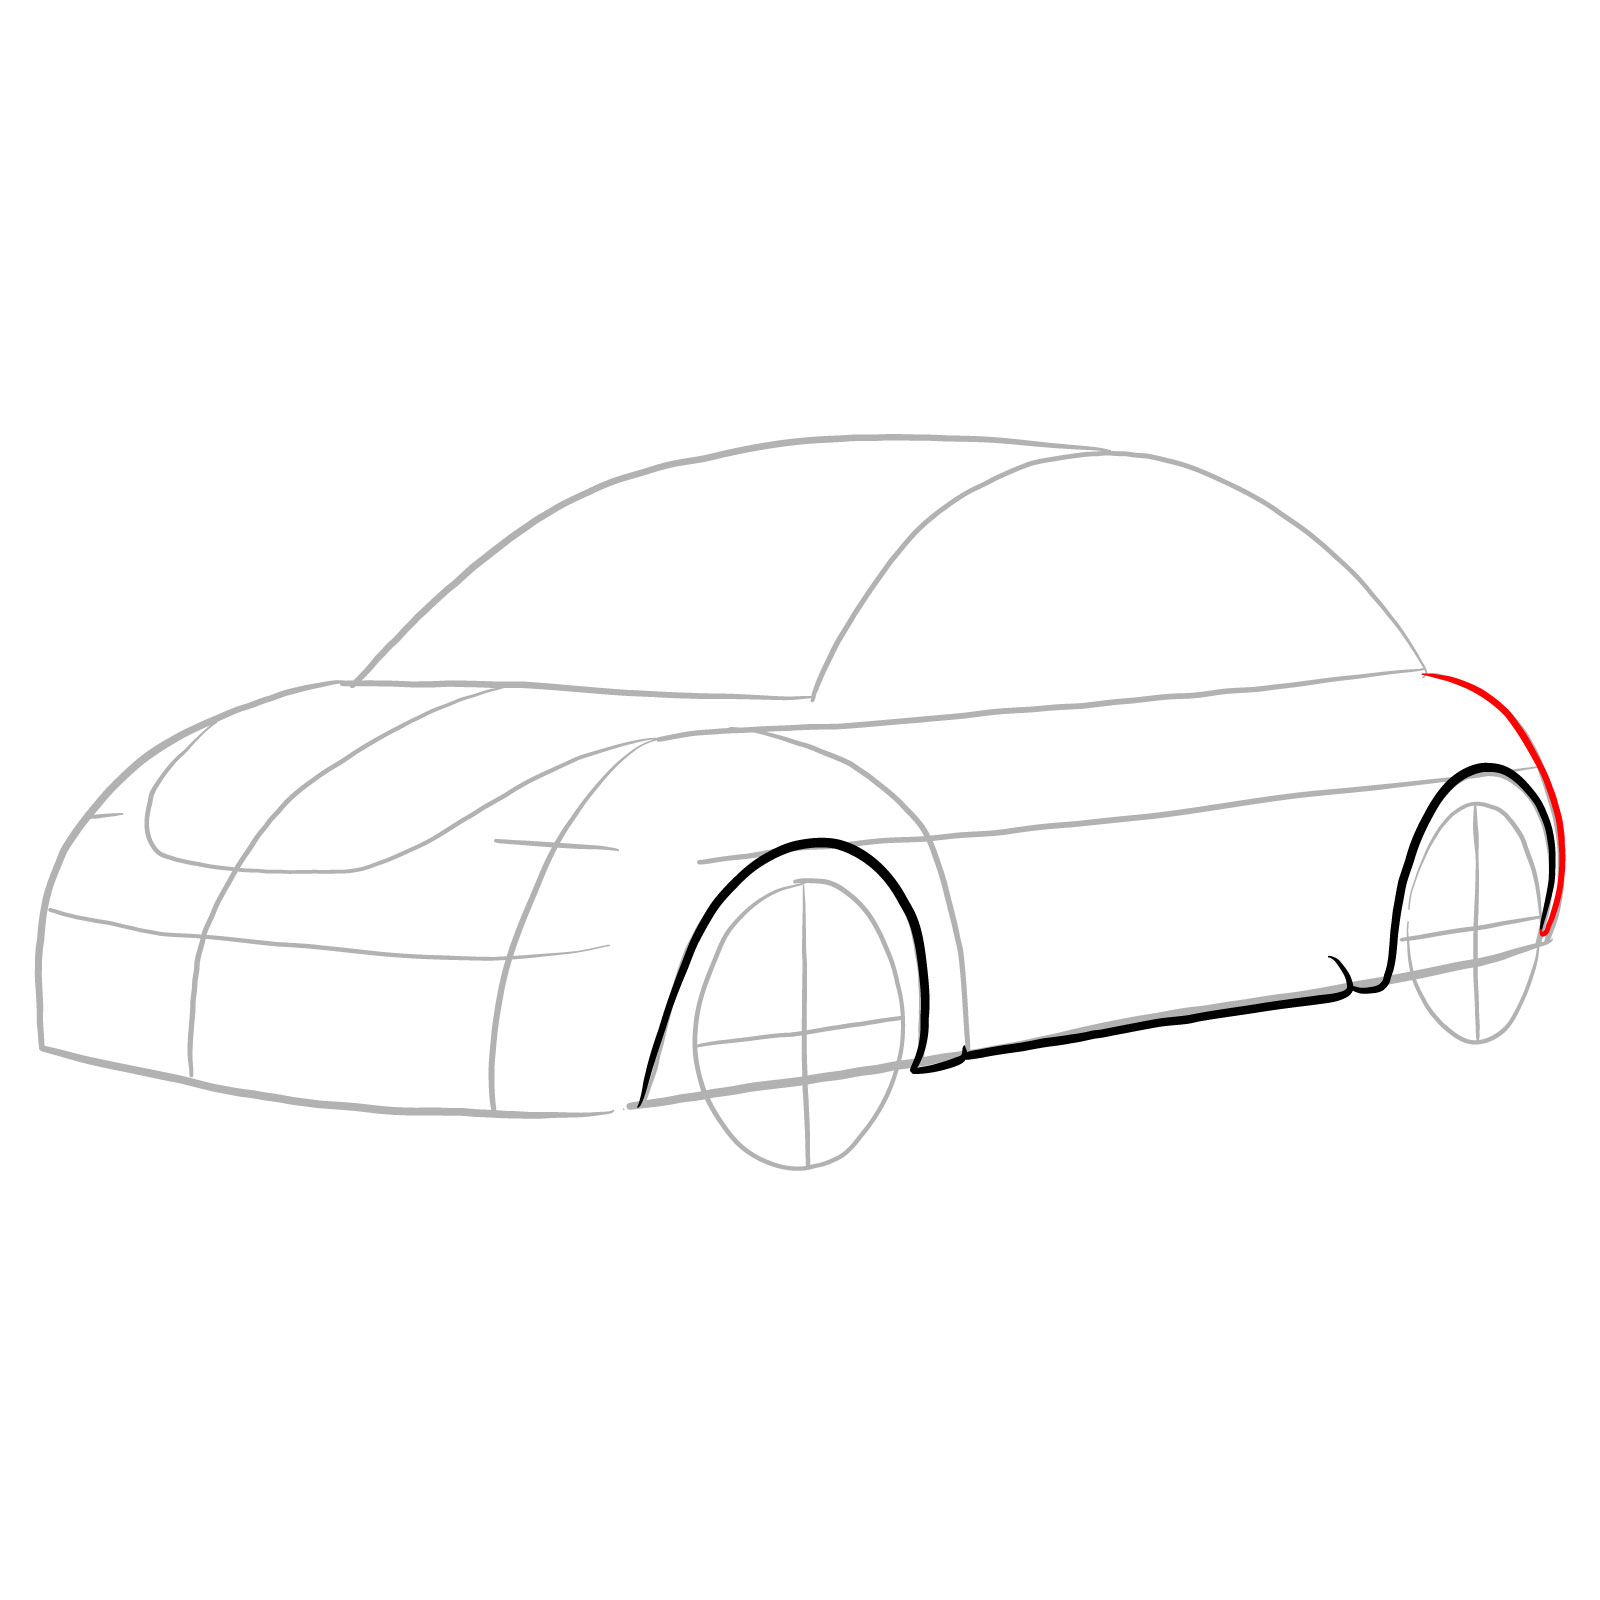 How to draw Volkswagen New Beetle - step 07